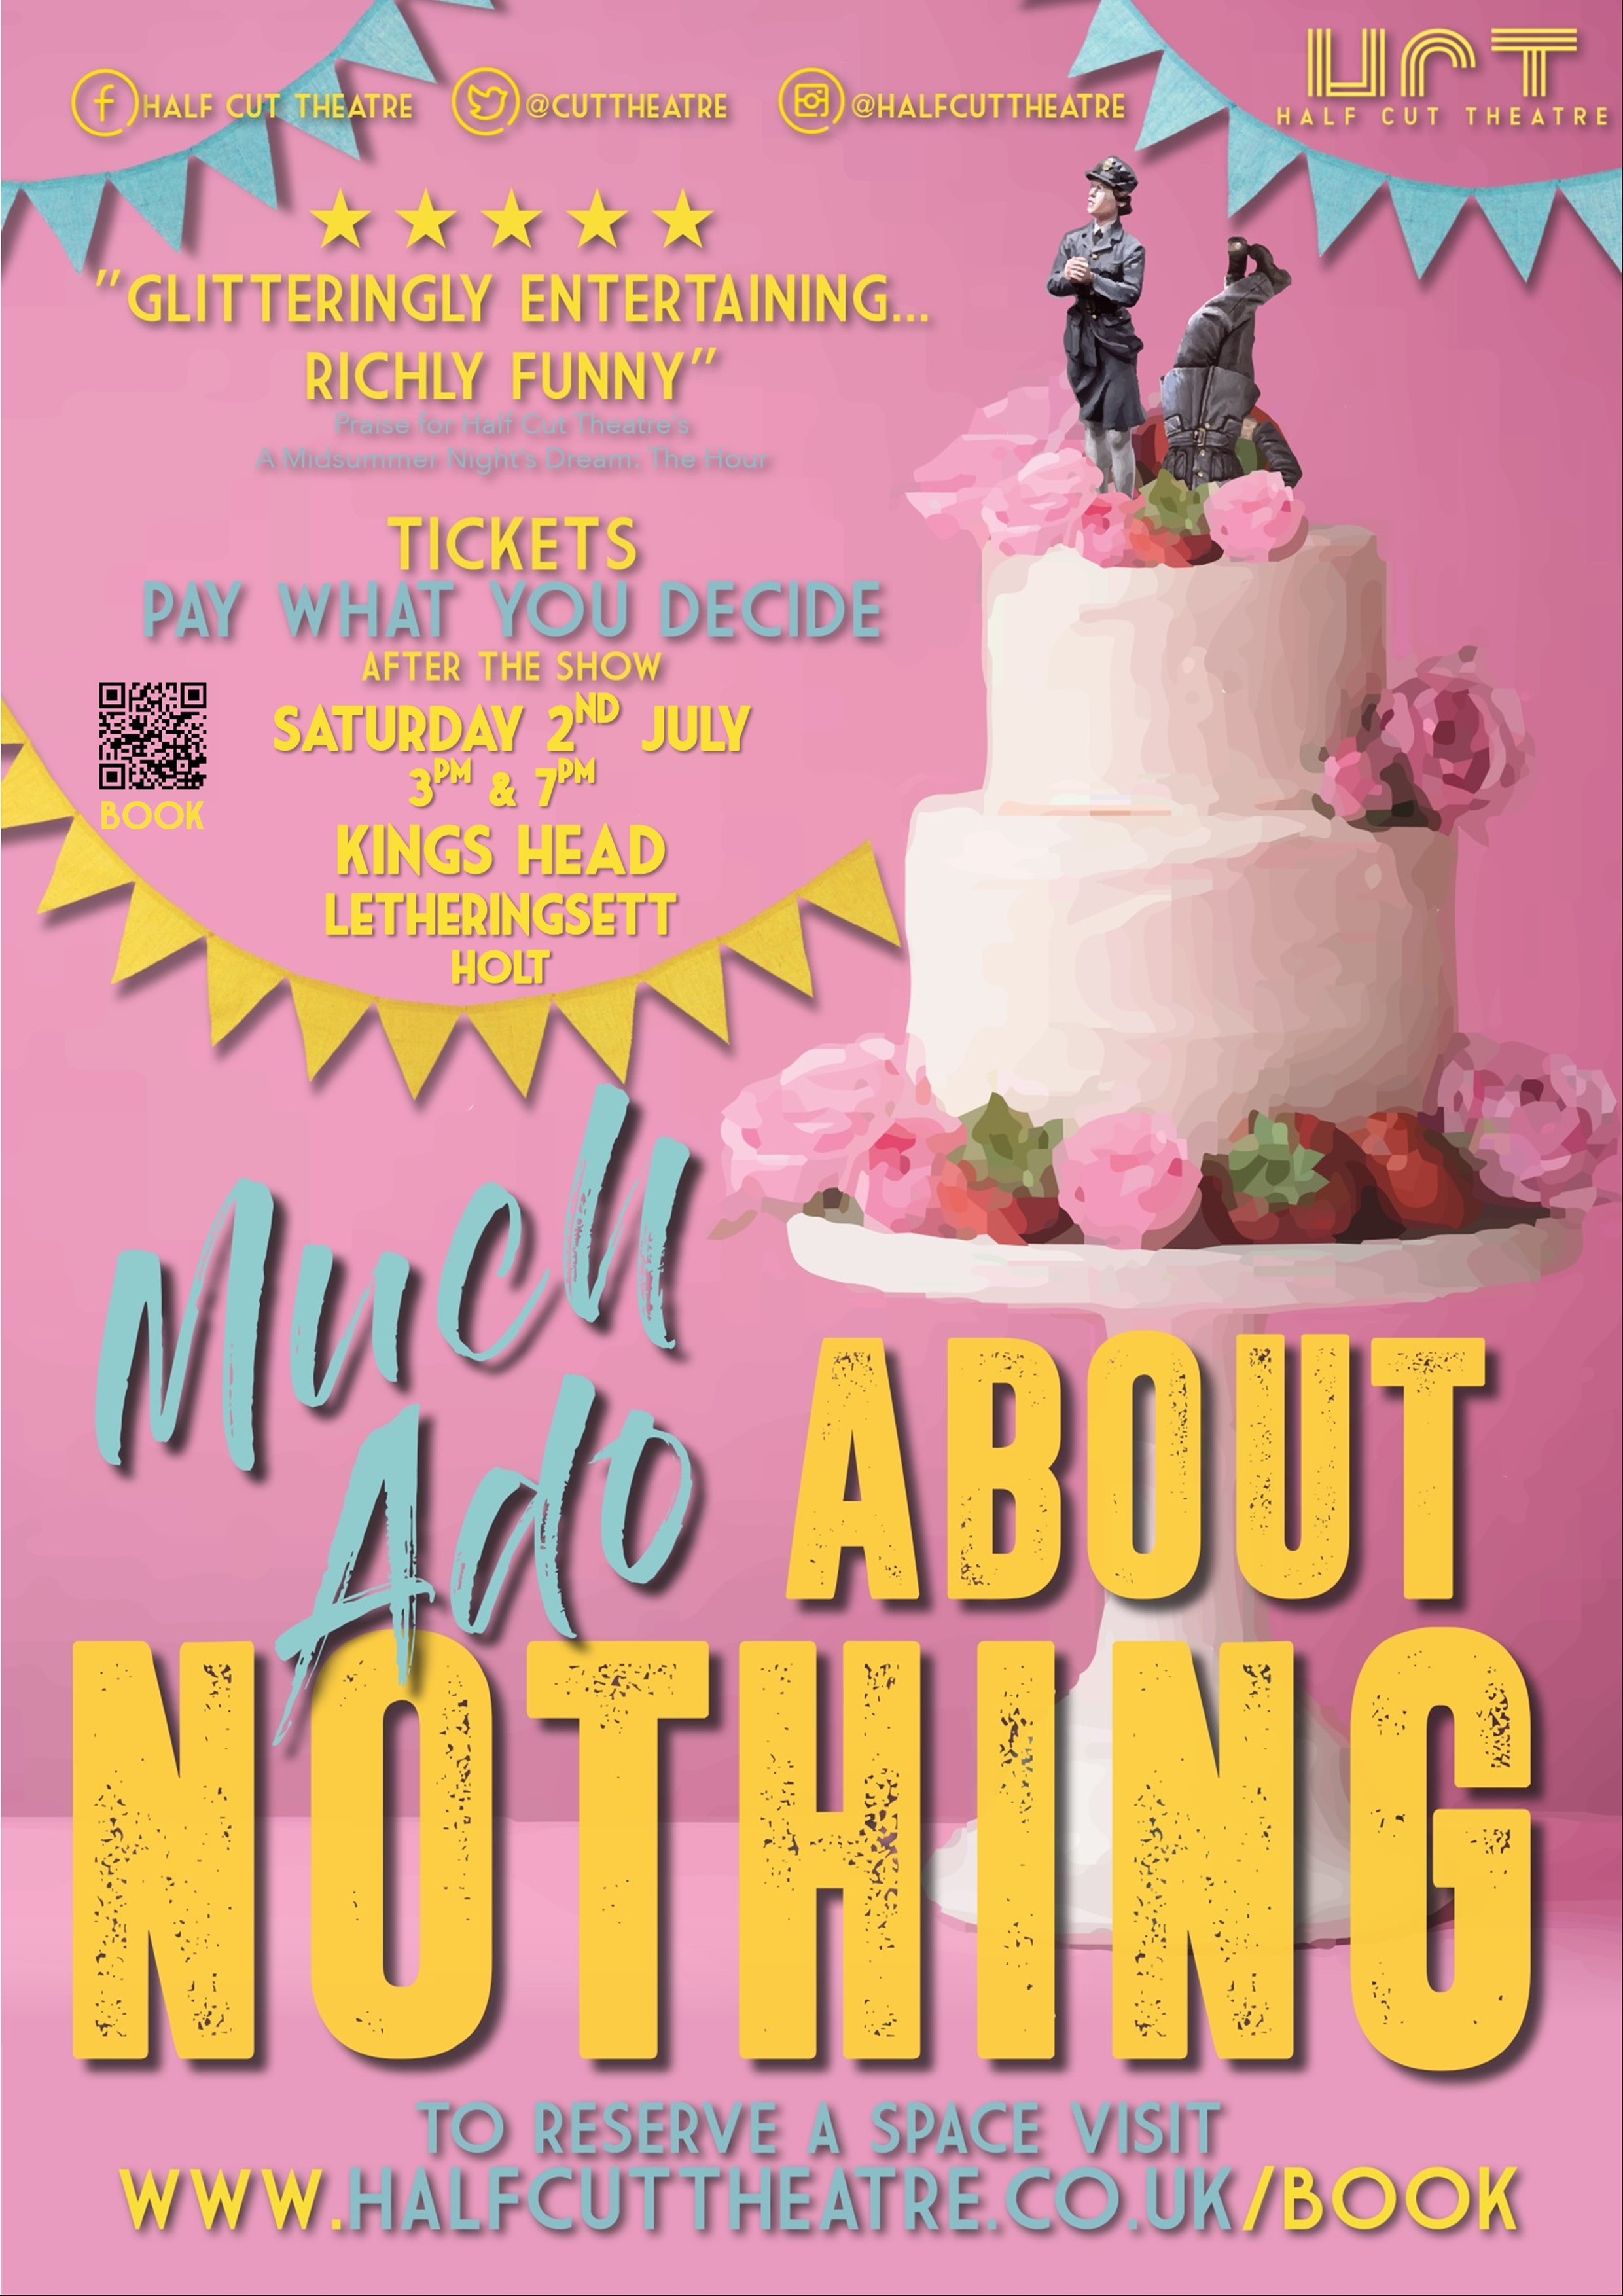 Much Ado About Nothing - Half cut Theatre - The Kings Head